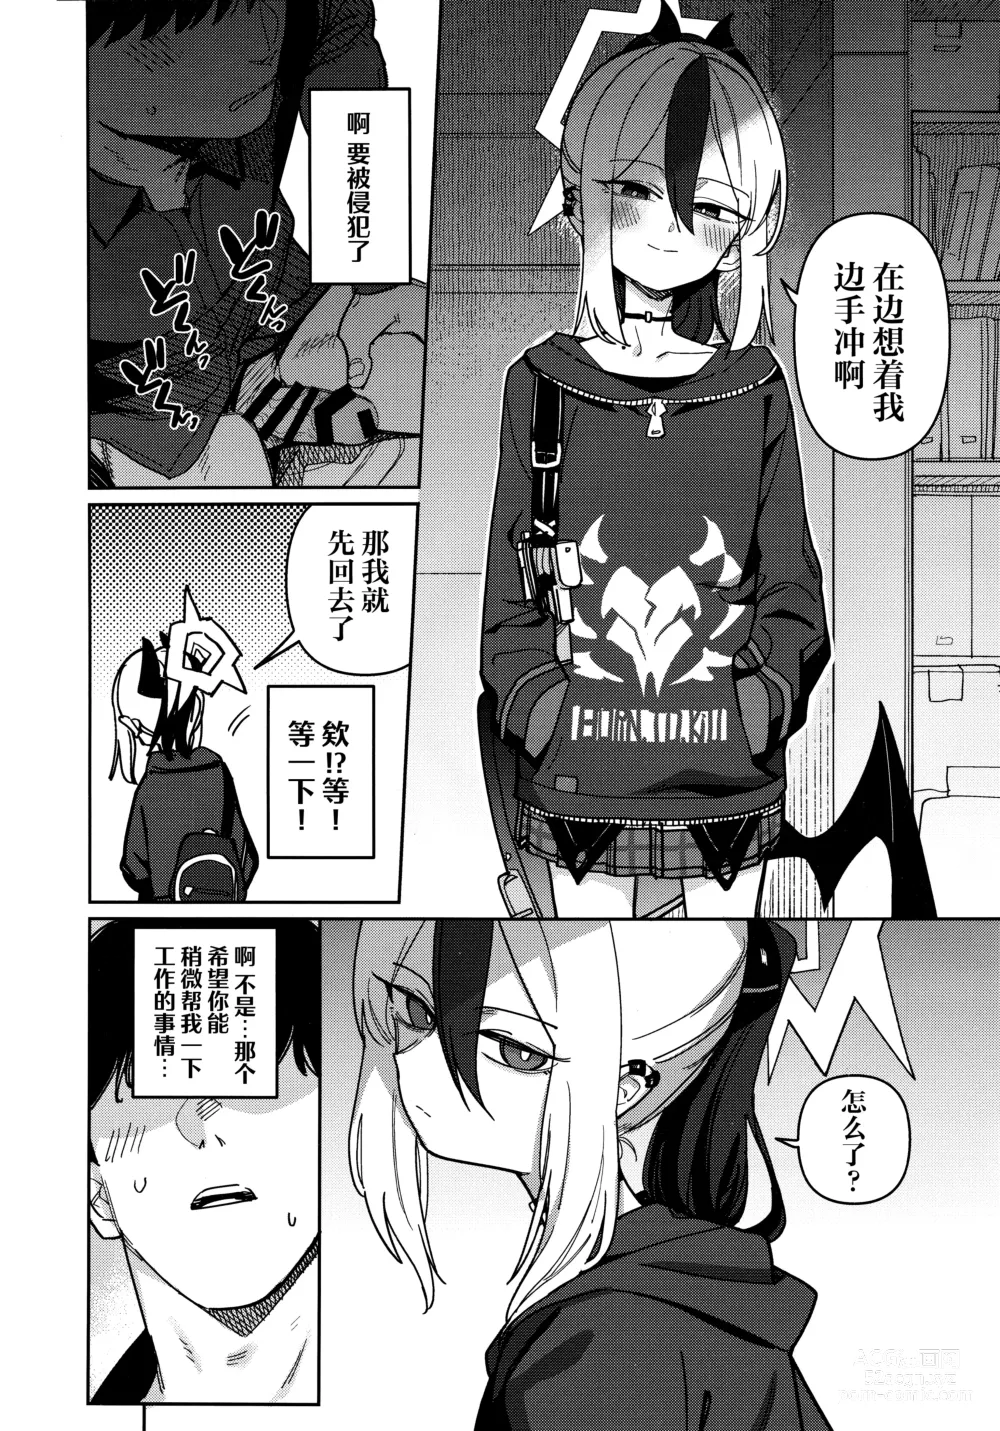 Page 6 of doujinshi 鬼方佳代子不会做这种事情 Part.2